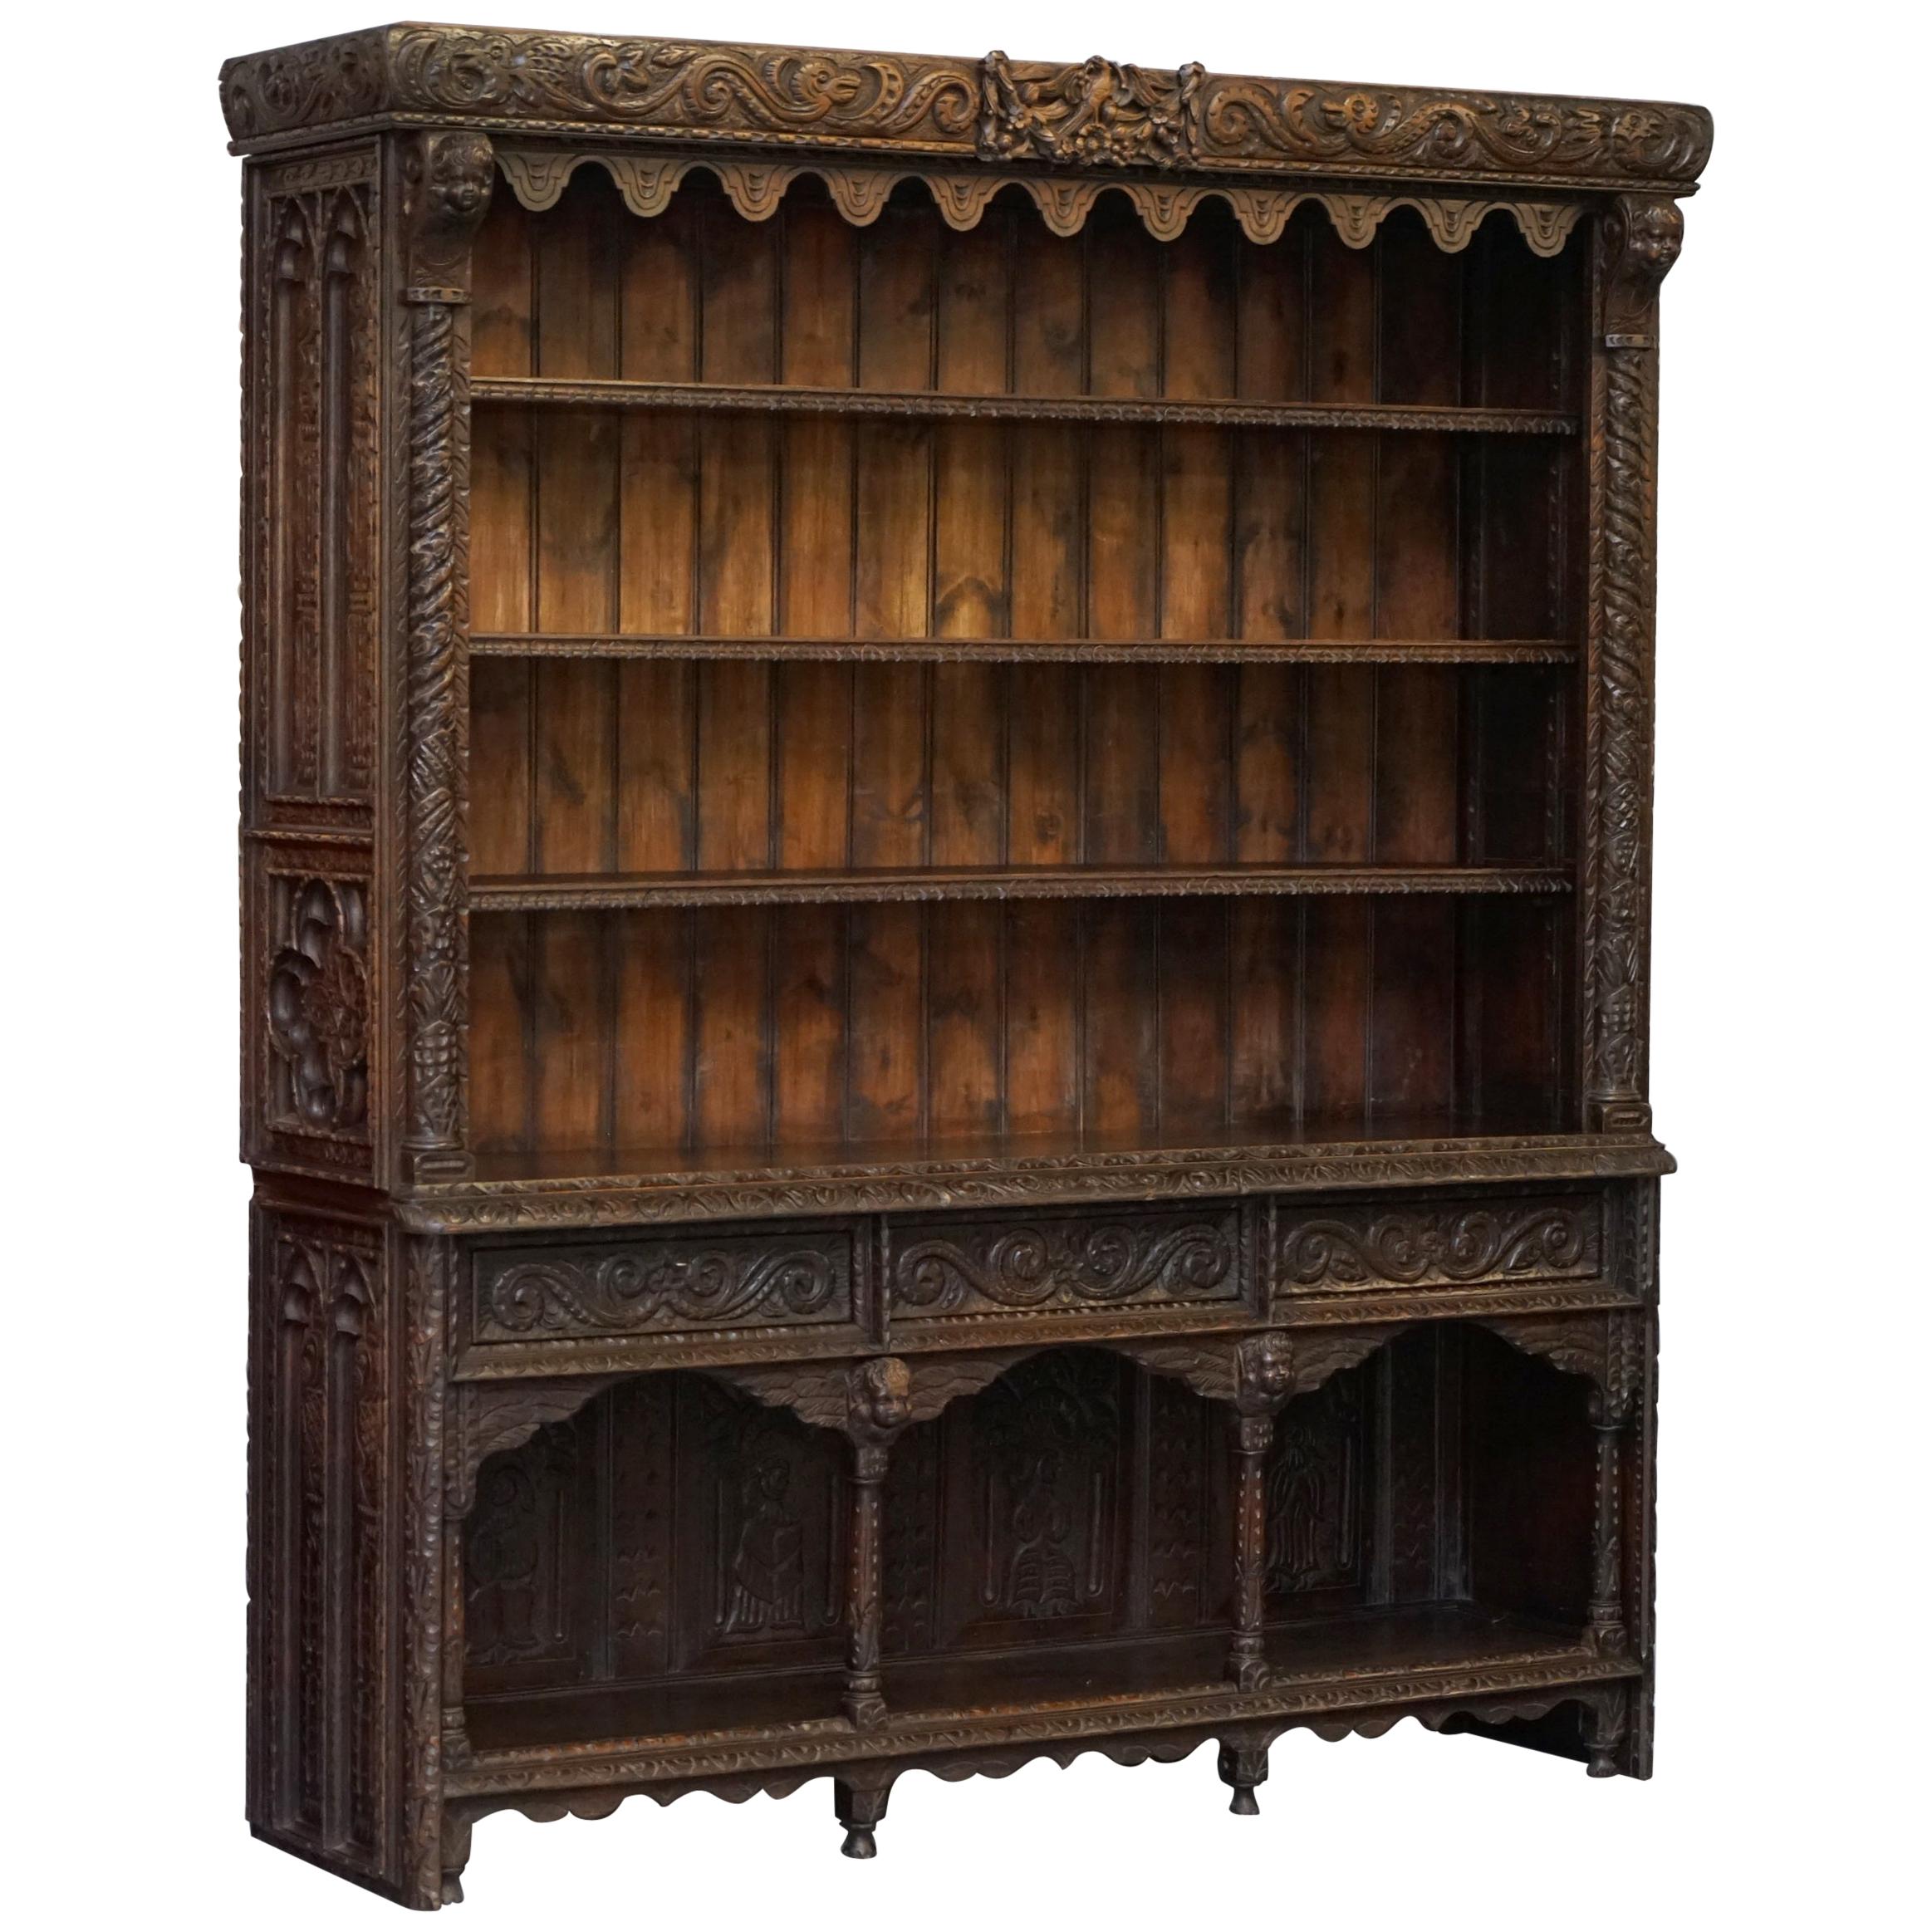 Important Gothic Revival Using 17th Century Panels Bookcase Dresser Cherubs For Sale